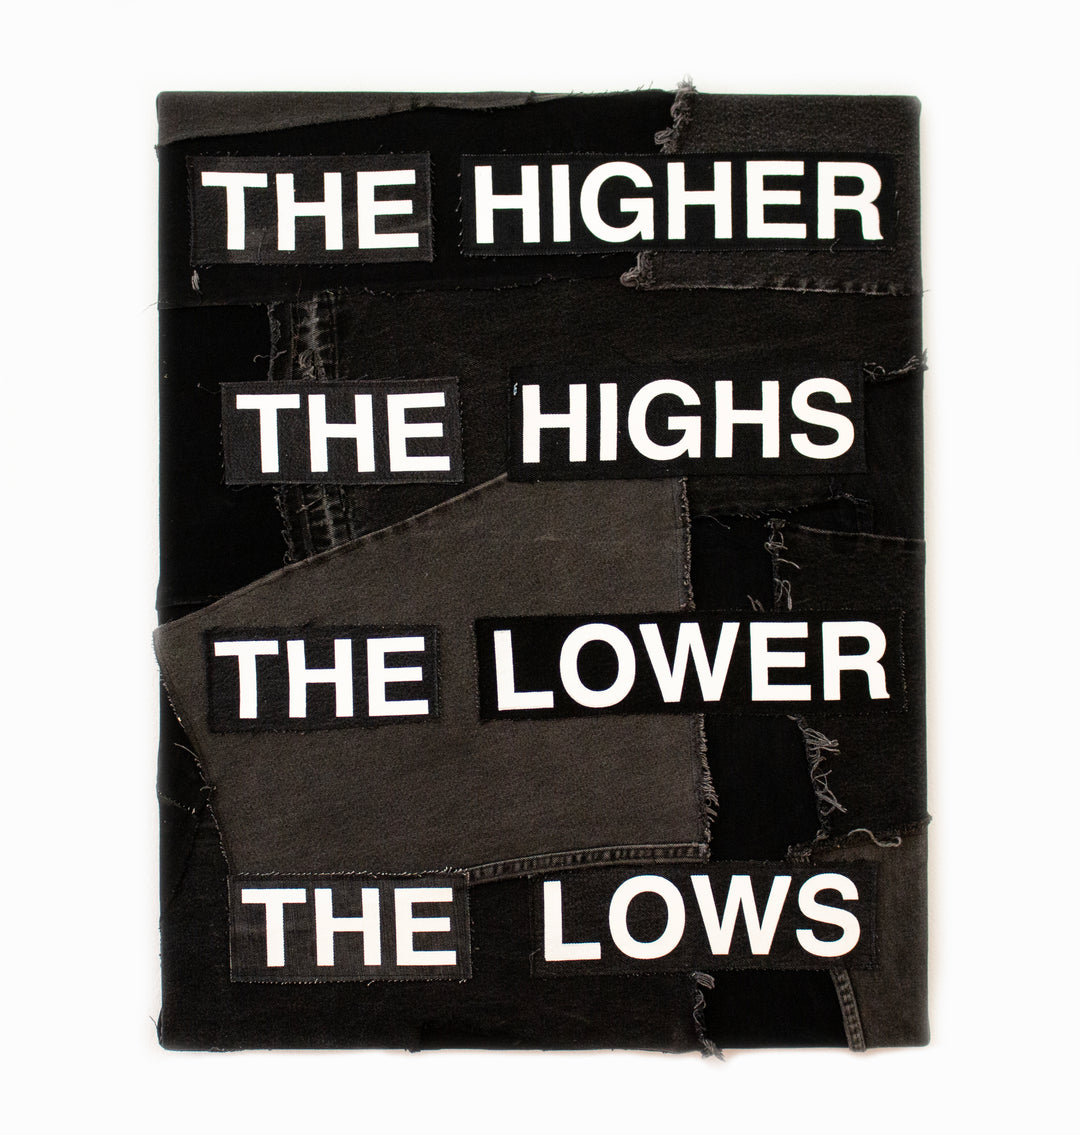 The Higher The Highs, The Lower The Lows: Black